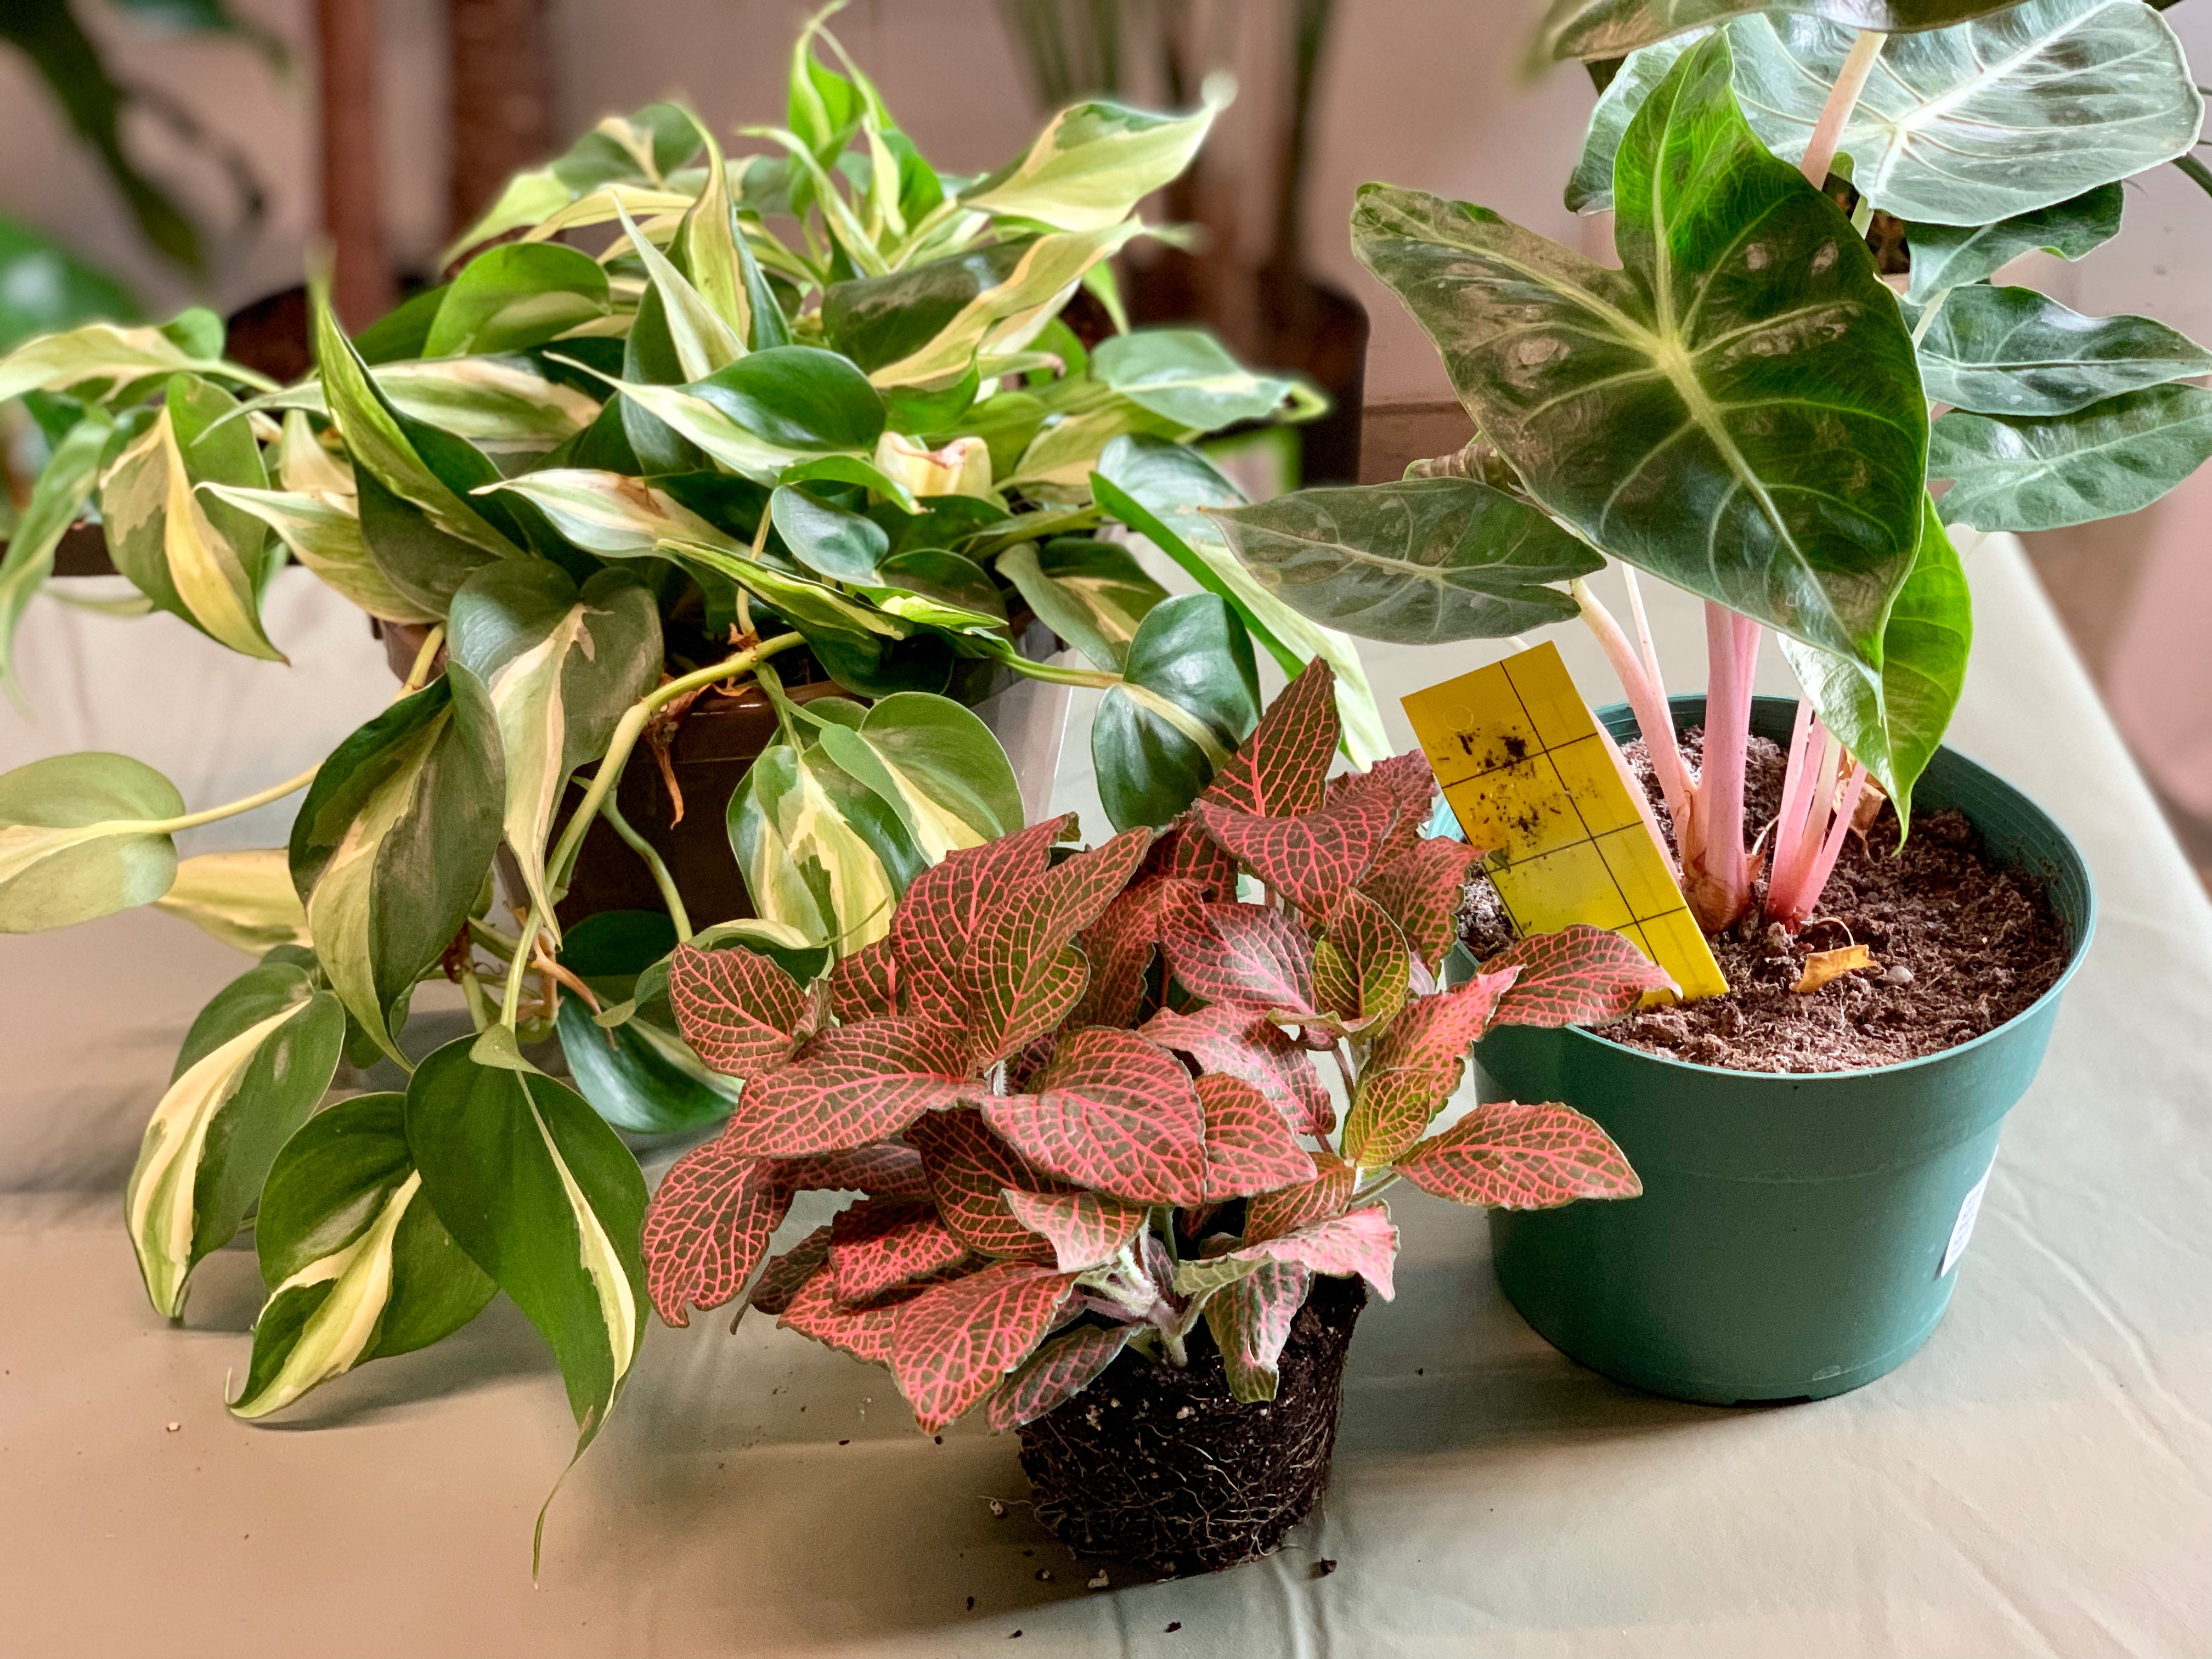 The easy way to get rid of Fungus Gnats on indoor plants (once and